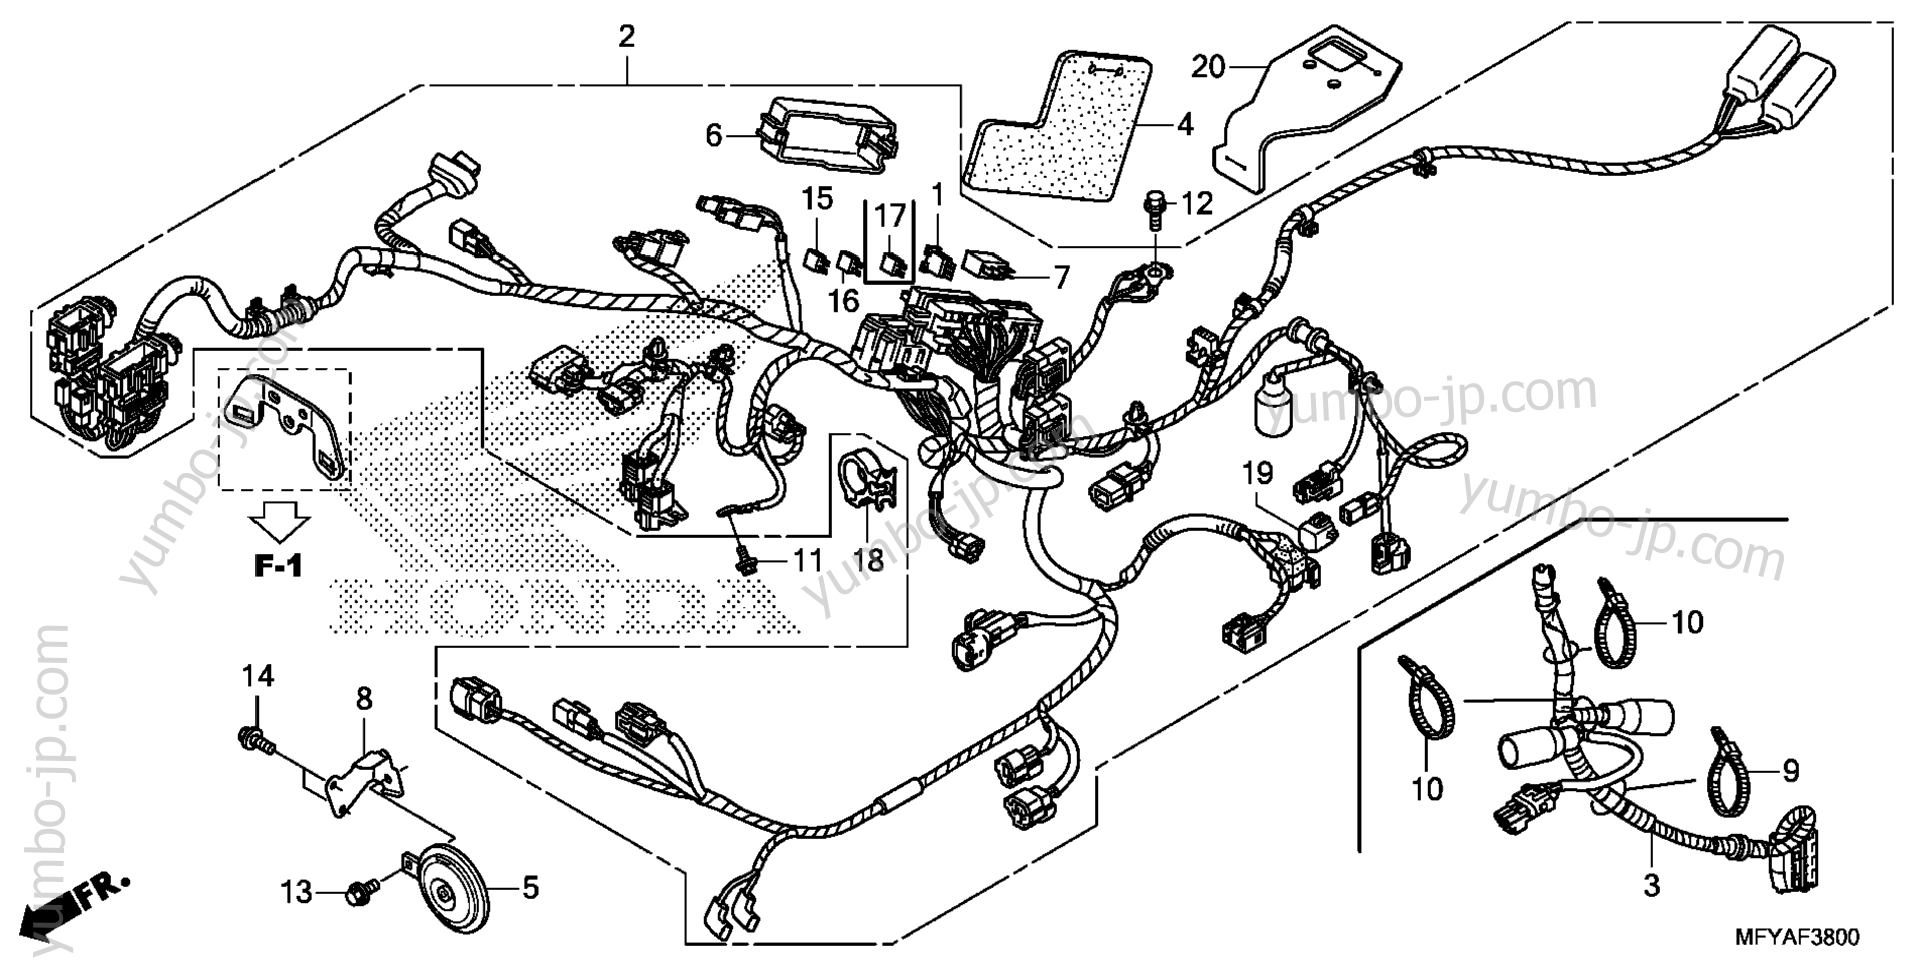 WIRE HARNESS / HORN for motorcycles HONDA VT1300CT A 2012 year